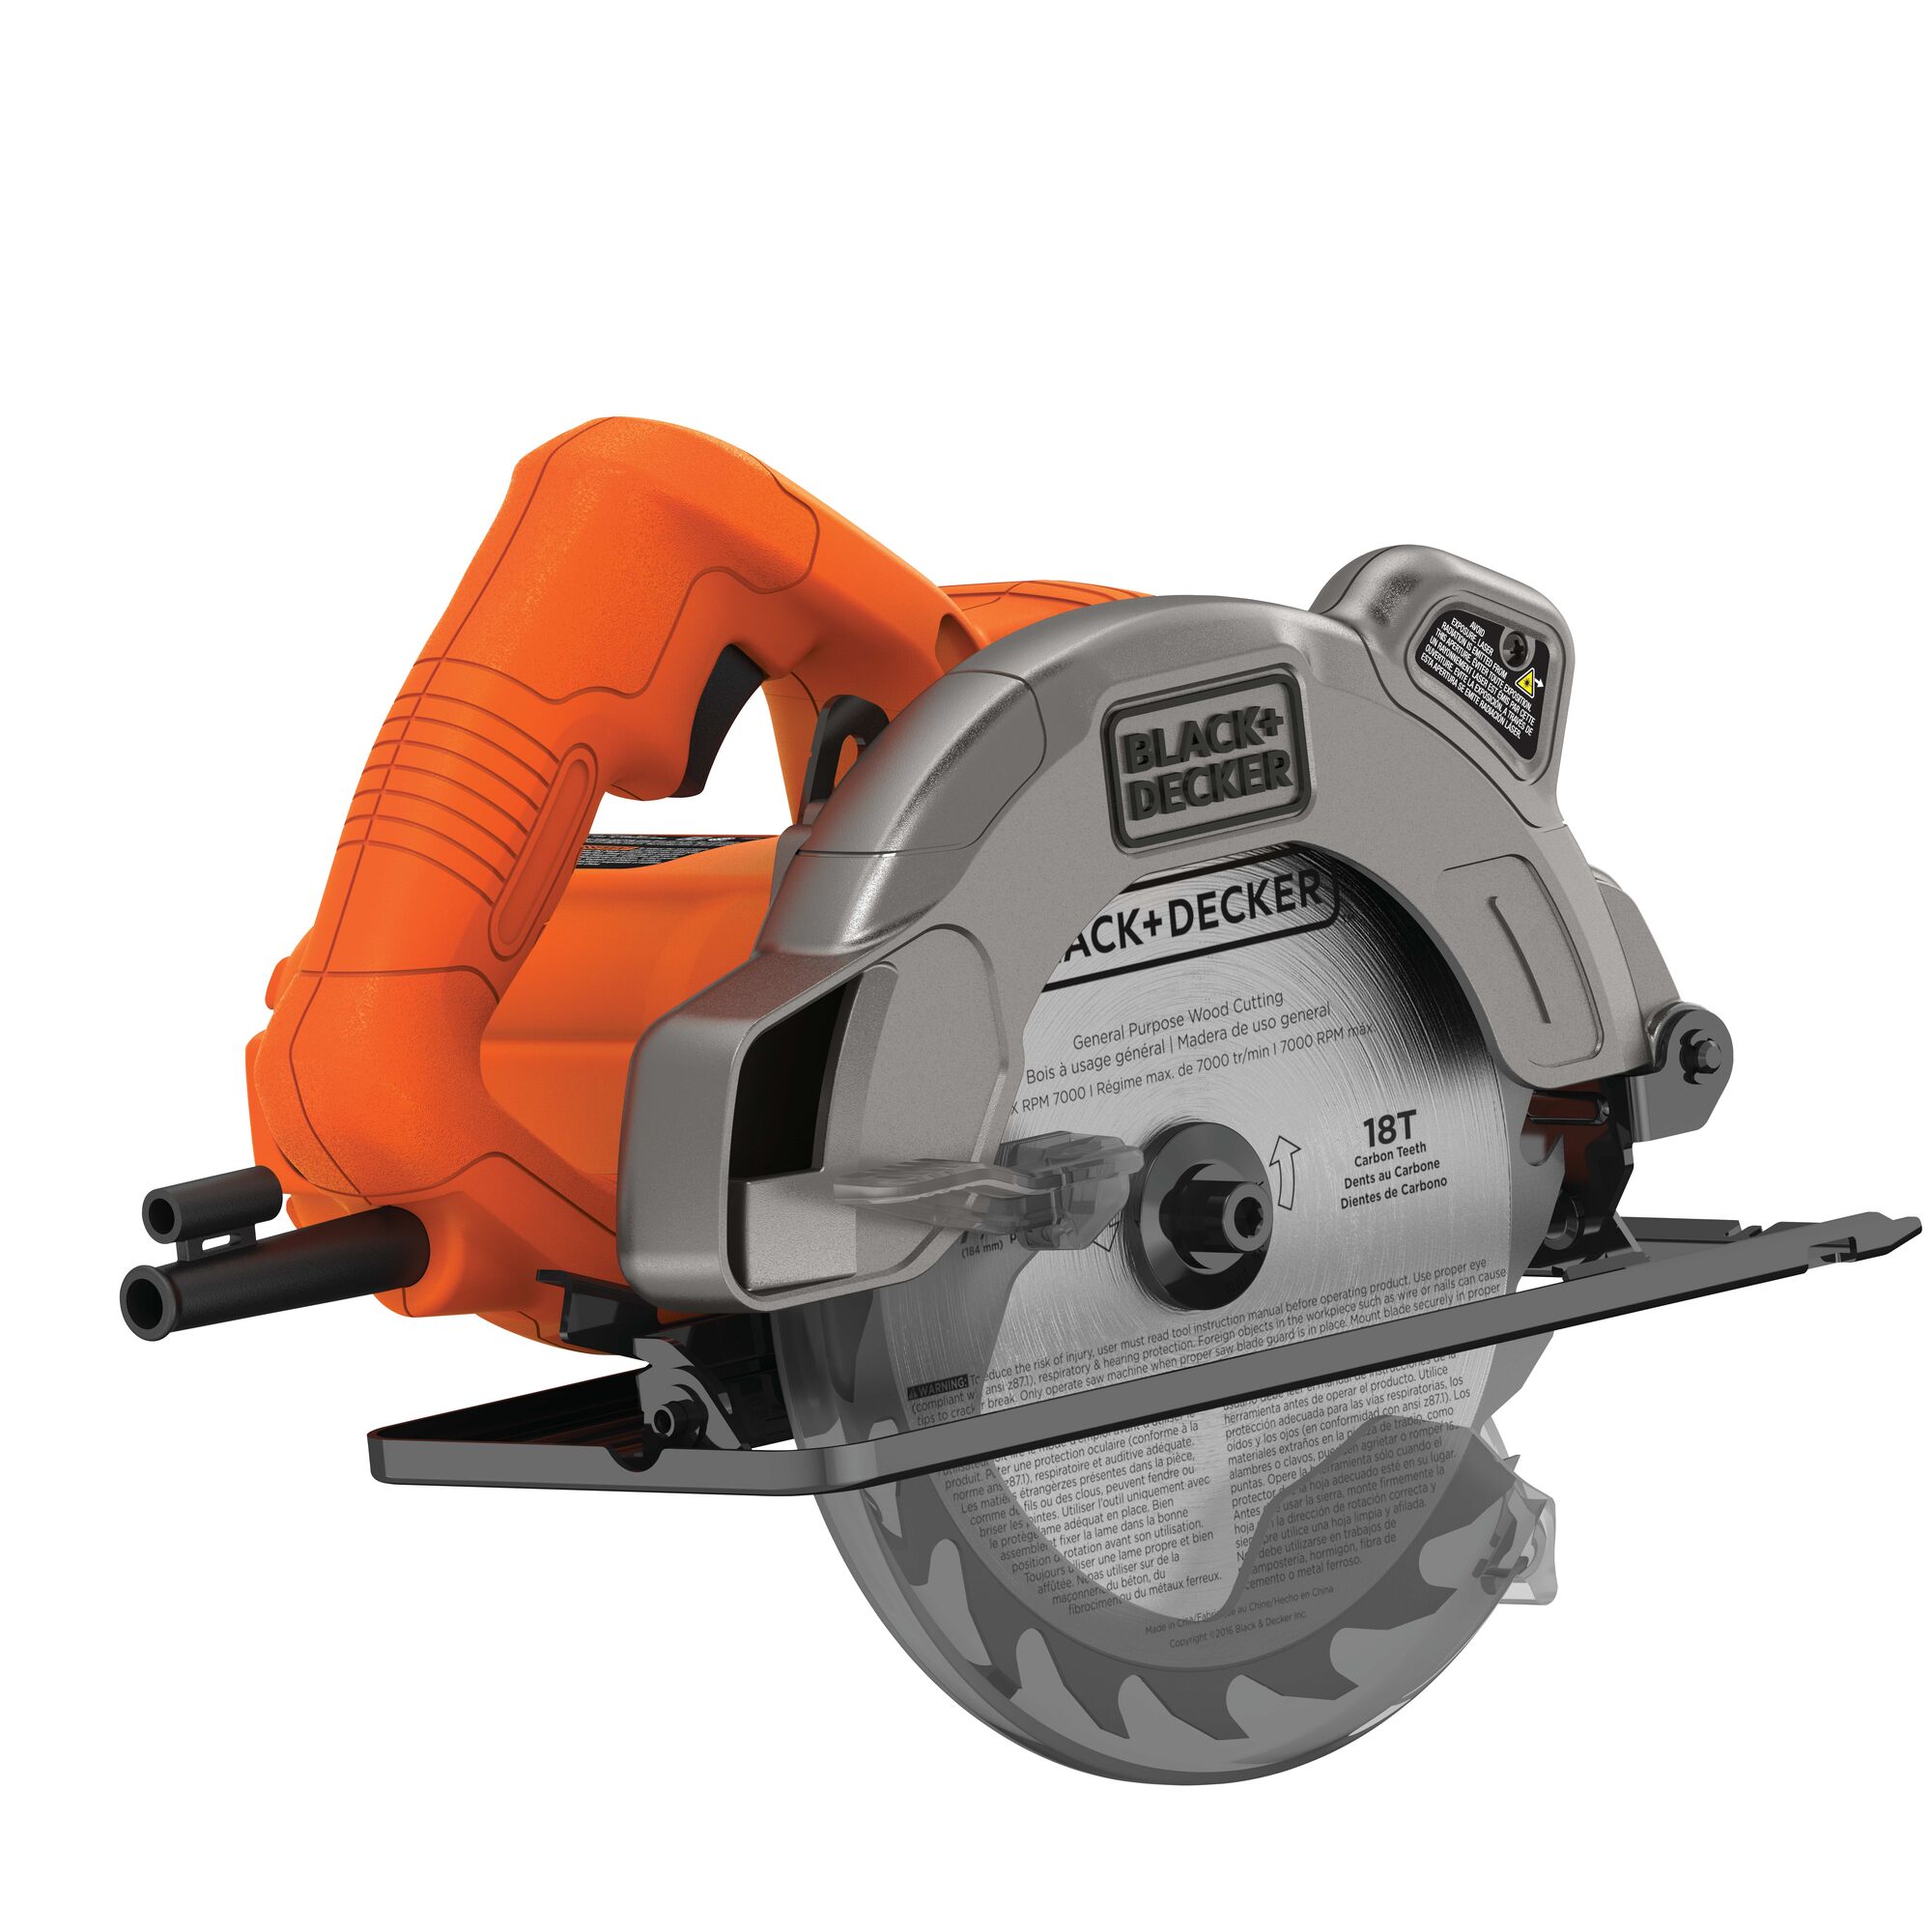 Profile of 13 Amp Circular Saw with Laser.